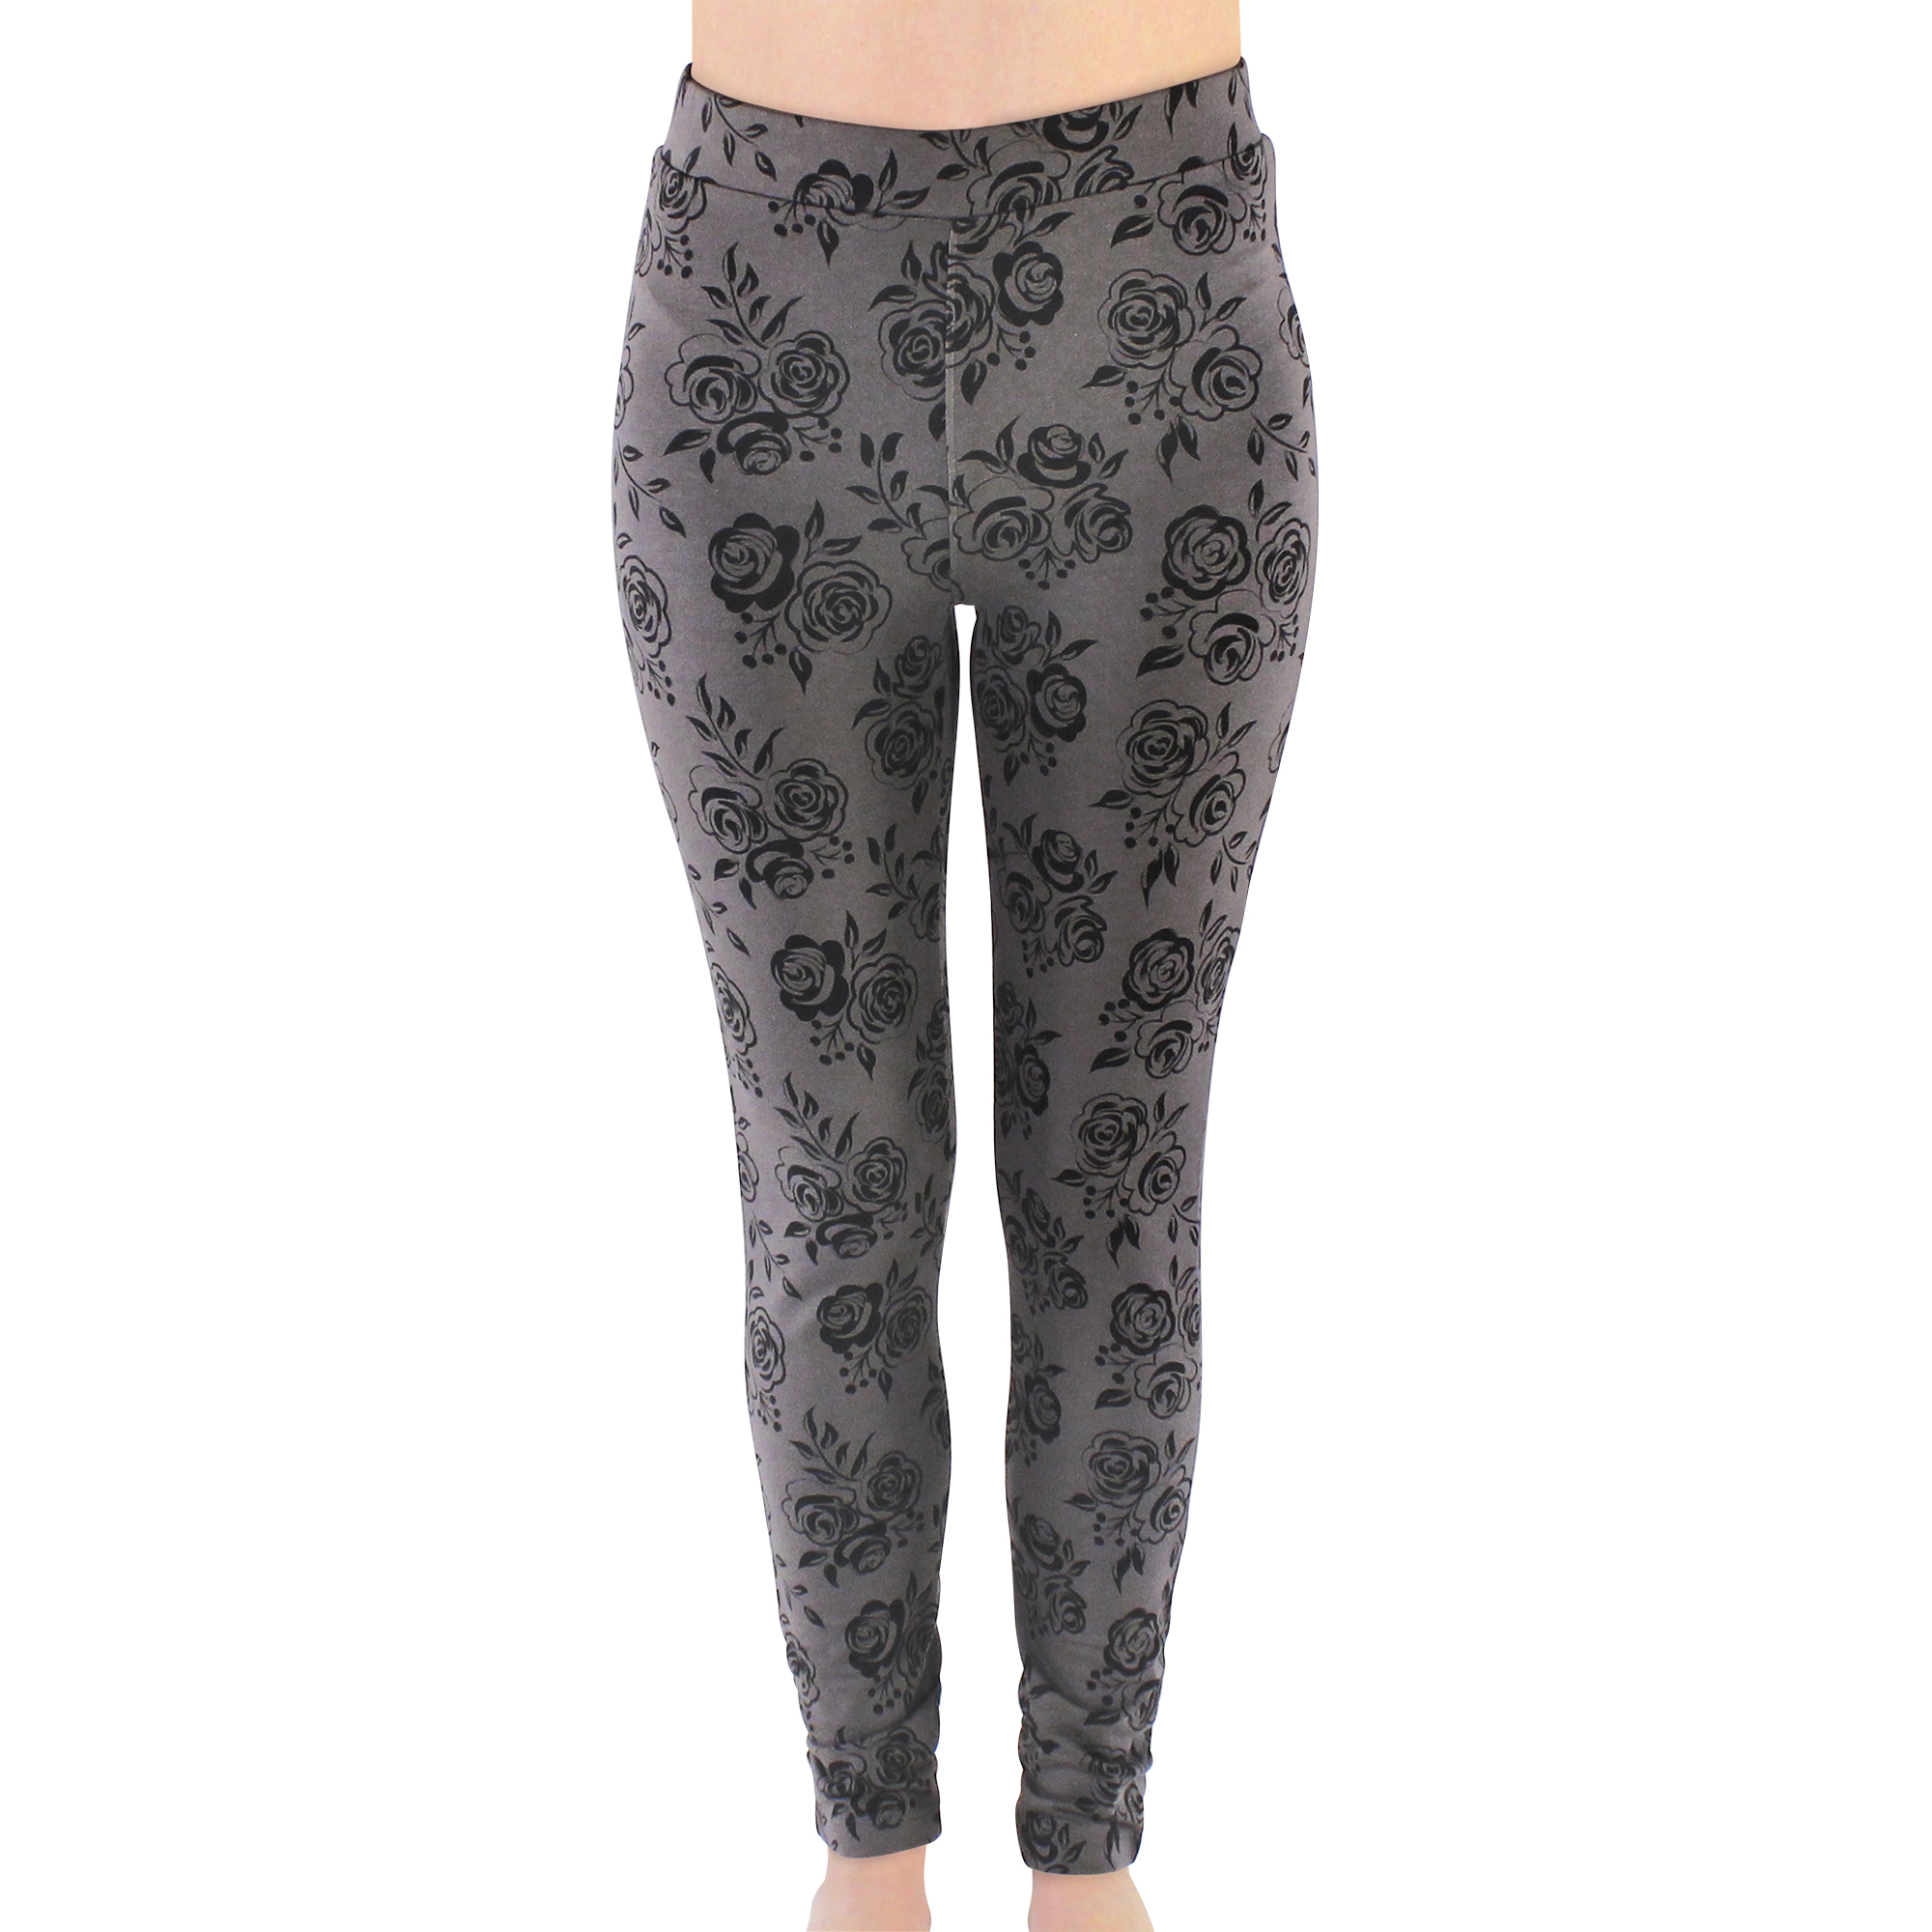 Touched by Nature Organic Cotton Leggings, Black Floral - Hudson